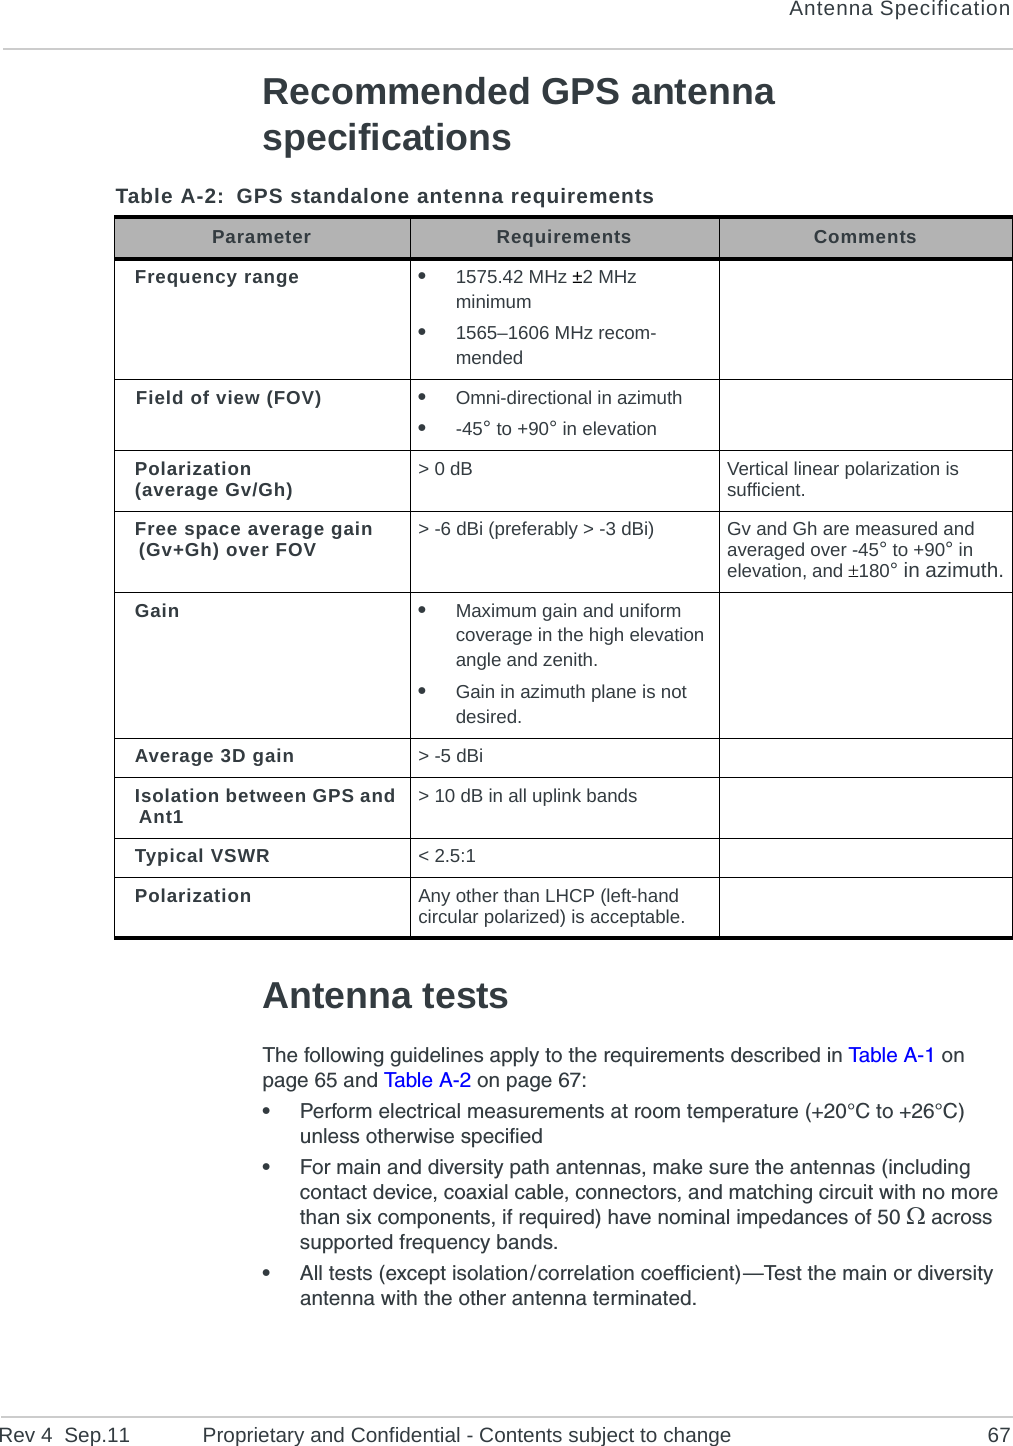 Antenna SpecificationRev 4  Sep.11 Proprietary and Confidential - Contents subject to change 67Recommended GPS antenna specificationsAntenna testsThe following guidelines apply to the requirements described in Tabl e A-1 on page 65 and Ta bl e  A-2 on page 67:•Perform electrical measurements at room temperature (+20°C to +26°C) unless otherwise specified•For main and diversity path antennas, make sure the antennas (including contact device, coaxial cable, connectors, and matching circuit with no more than six components, if required) have nominal impedances of 50  across supported frequency bands.•All tests (except isolation / correlation coefficient) —Test the main or diversity antenna with the other antenna terminated.Table A-2: GPS standalone antenna requirements Parameter Requirements CommentsFrequency range •1575.42 MHz ±2 MHz minimum•1565–1606 MHz recom-mendedField of view (FOV) •Omni-directional in azimuth•-45° to +90° in elevationPolarization(average Gv/Gh) &gt; 0 dB Vertical linear polarization is sufficient.Free space average gain (Gv+Gh) over FOV &gt; -6 dBi (preferably &gt; -3 dBi) Gv and Gh are measured and averaged over -45° to +90° in elevation, and 180° in azimuth.Gain •Maximum gain and uniform coverage in the high elevation angle and zenith.•Gain in azimuth plane is not desired.Average 3D gain &gt; -5 dBiIsolation between GPS and Ant1 &gt; 10 dB in all uplink bandsTypical VSWR &lt; 2.5:1Polarization Any other than LHCP (left-hand circular polarized) is acceptable.